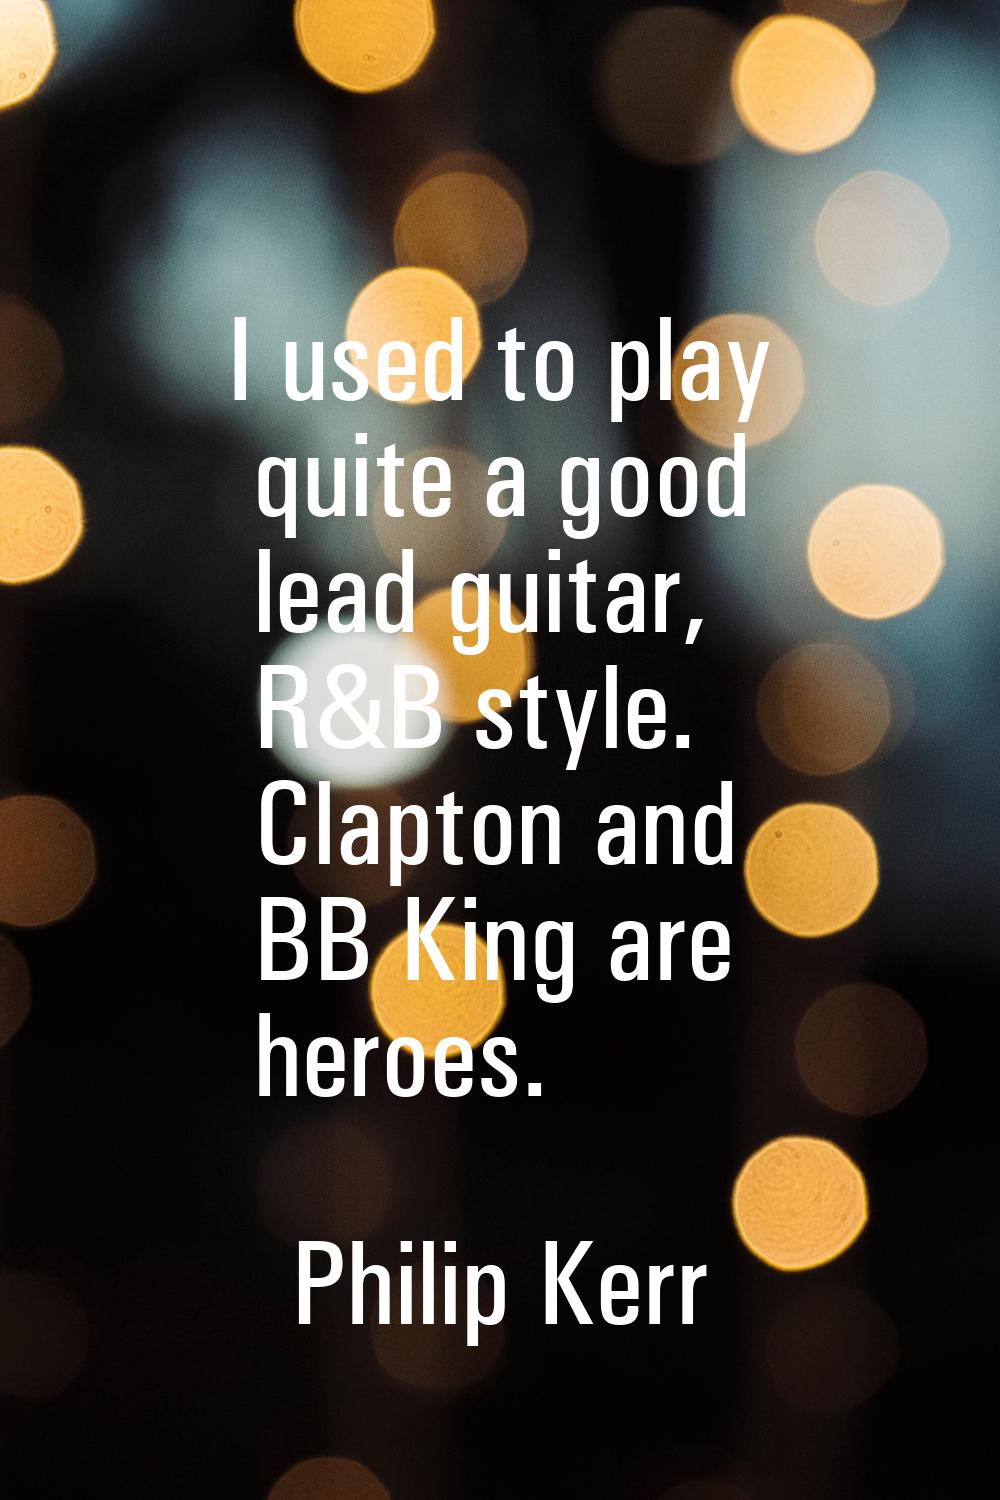 I used to play quite a good lead guitar, R&B style. Clapton and BB King are heroes.